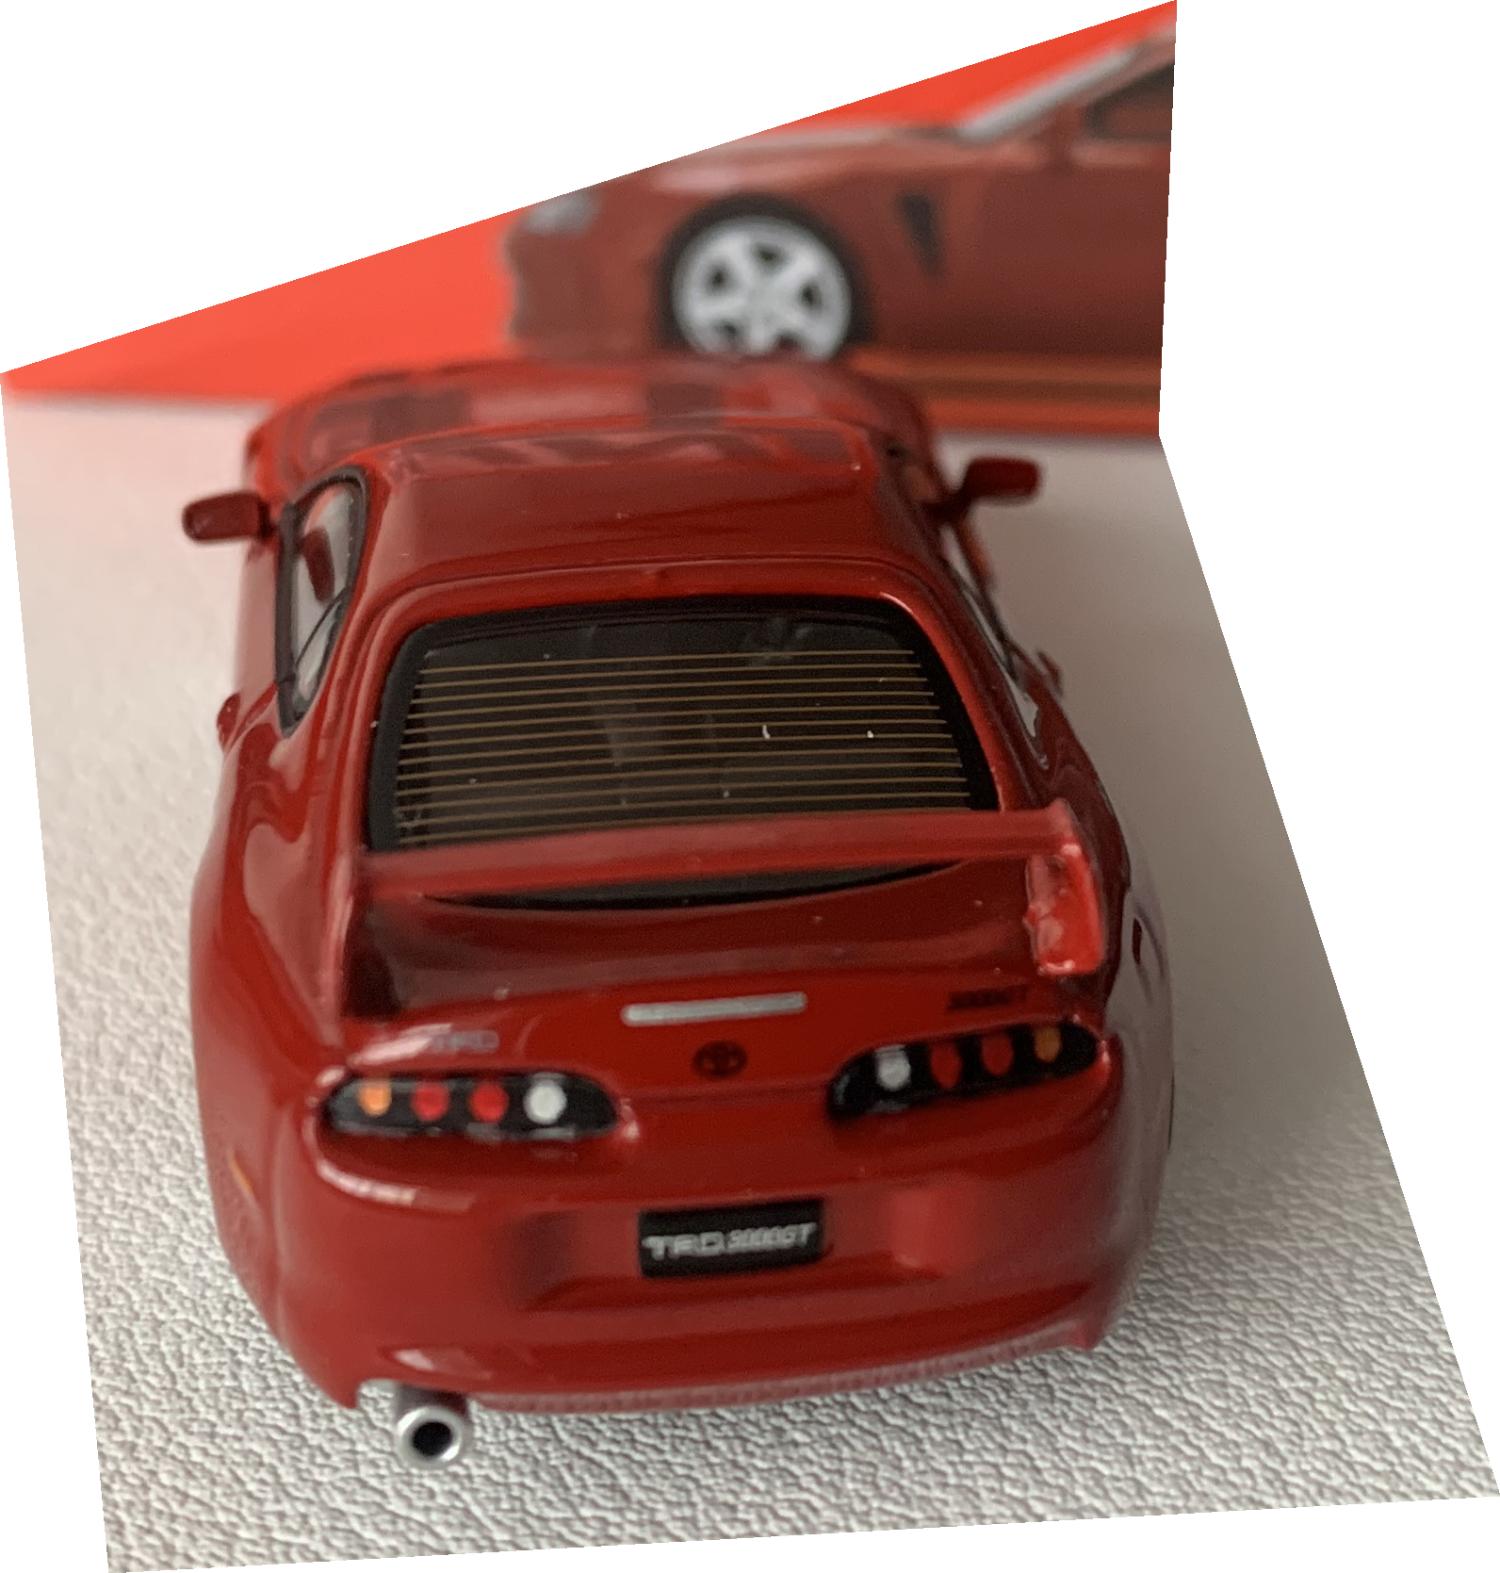 A good reproduction of the Toyota TRD 3000GT with detail throughout, all authentically recreated.  The model is presented in a box, the car is approx. 7 cm long and the box is 10 cm long